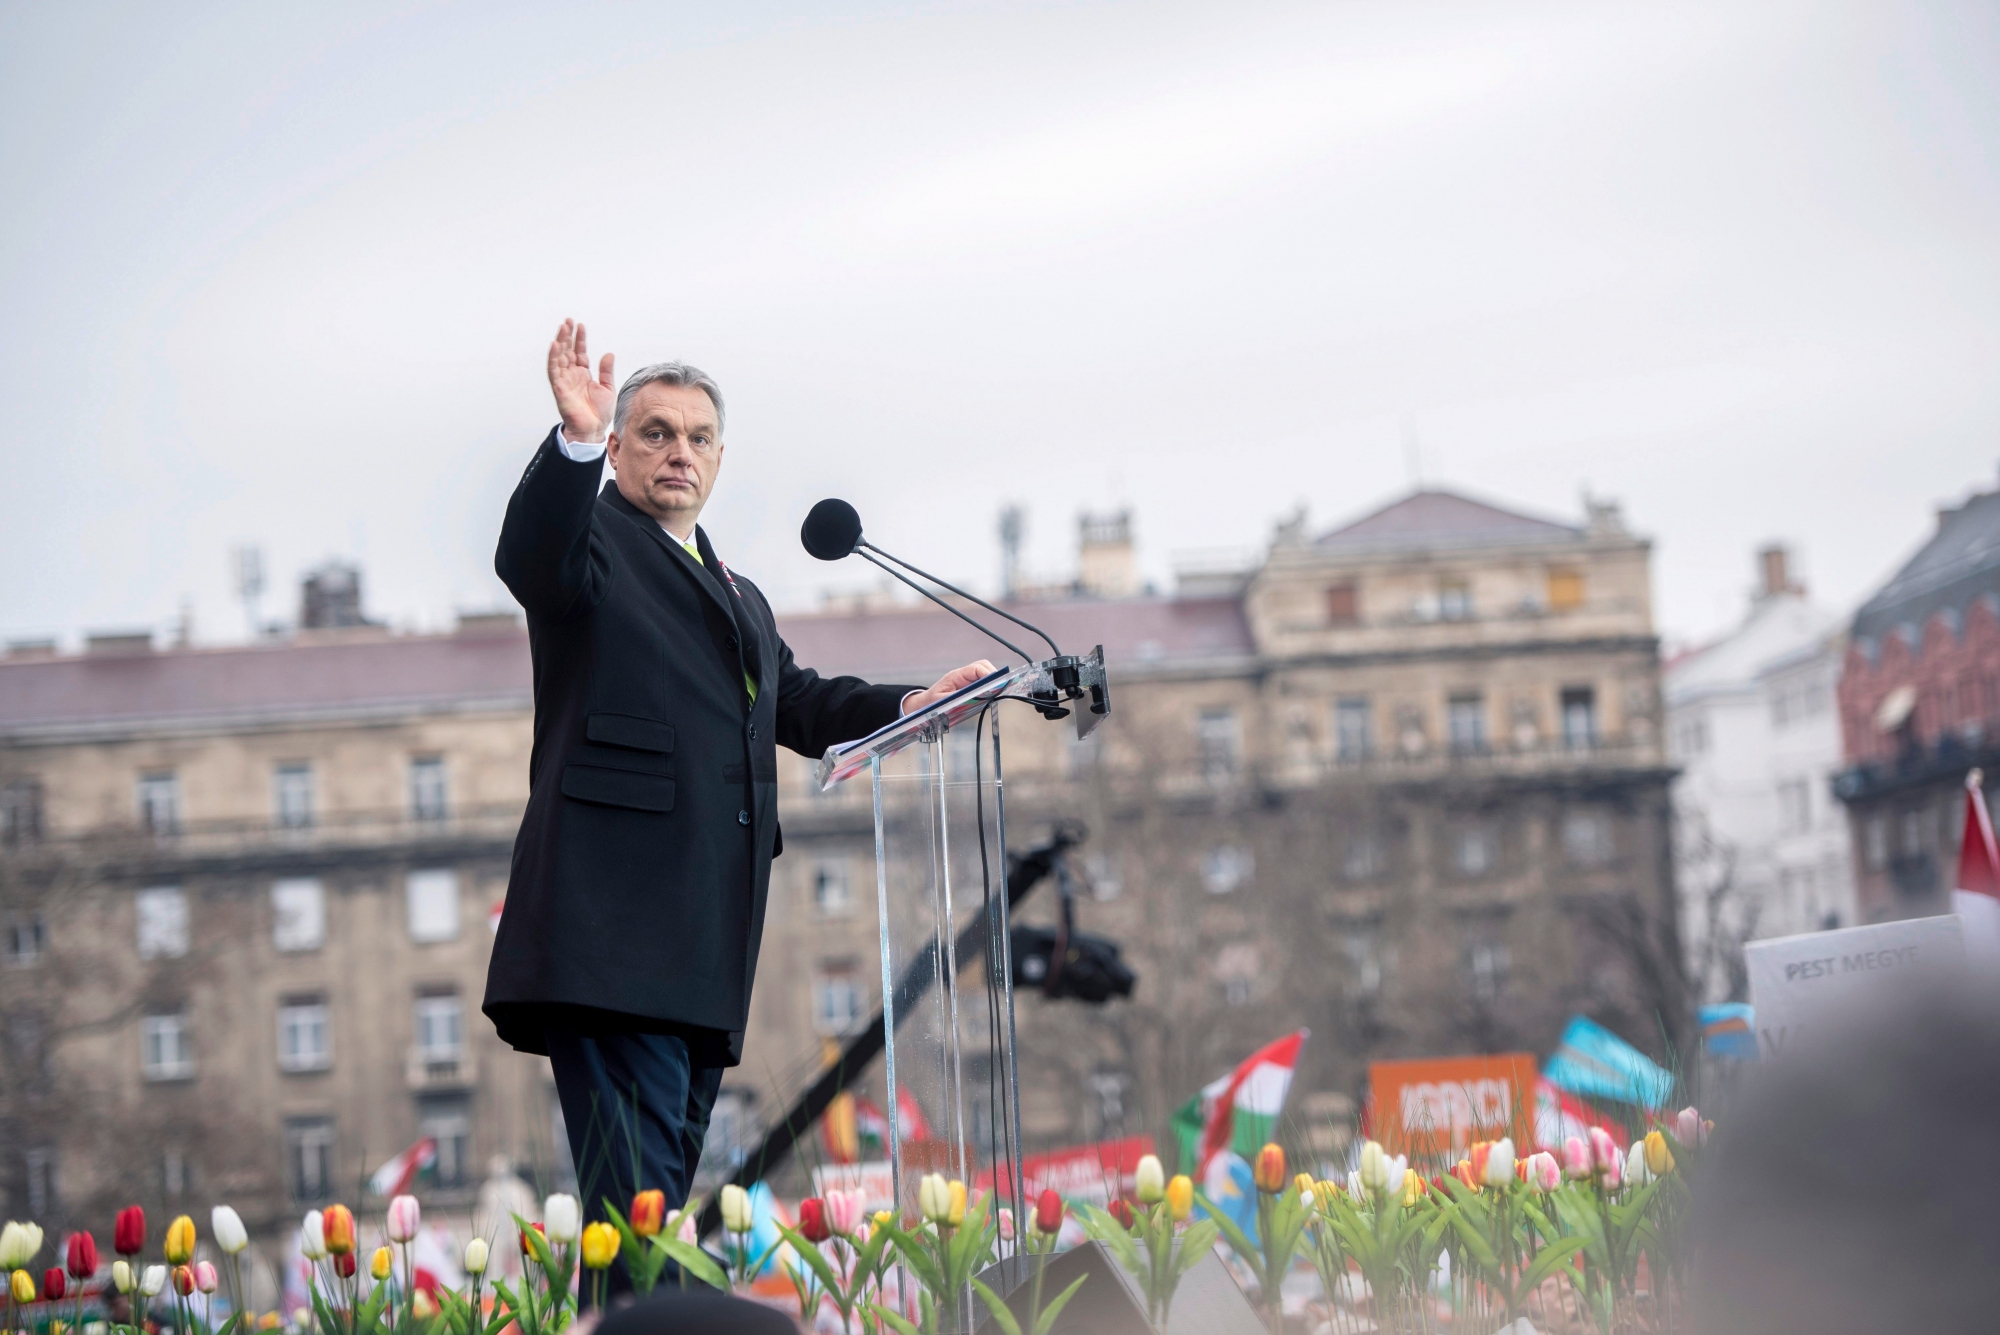 epa06605838 Hungarian Prime Minister Viktor Orban arrives on the stage to address the crowd celebrating the national holiday, the 170th anniversary of the outbreak of the 1848 revolution and war of independence against the Habsburg rule in the square in front of the Parliament building in Budapest, Hungary, 15 March 2018.  EPA/Tamas Soki HUNGARY OUT HUNGARY NATIONAL HOLIDAY